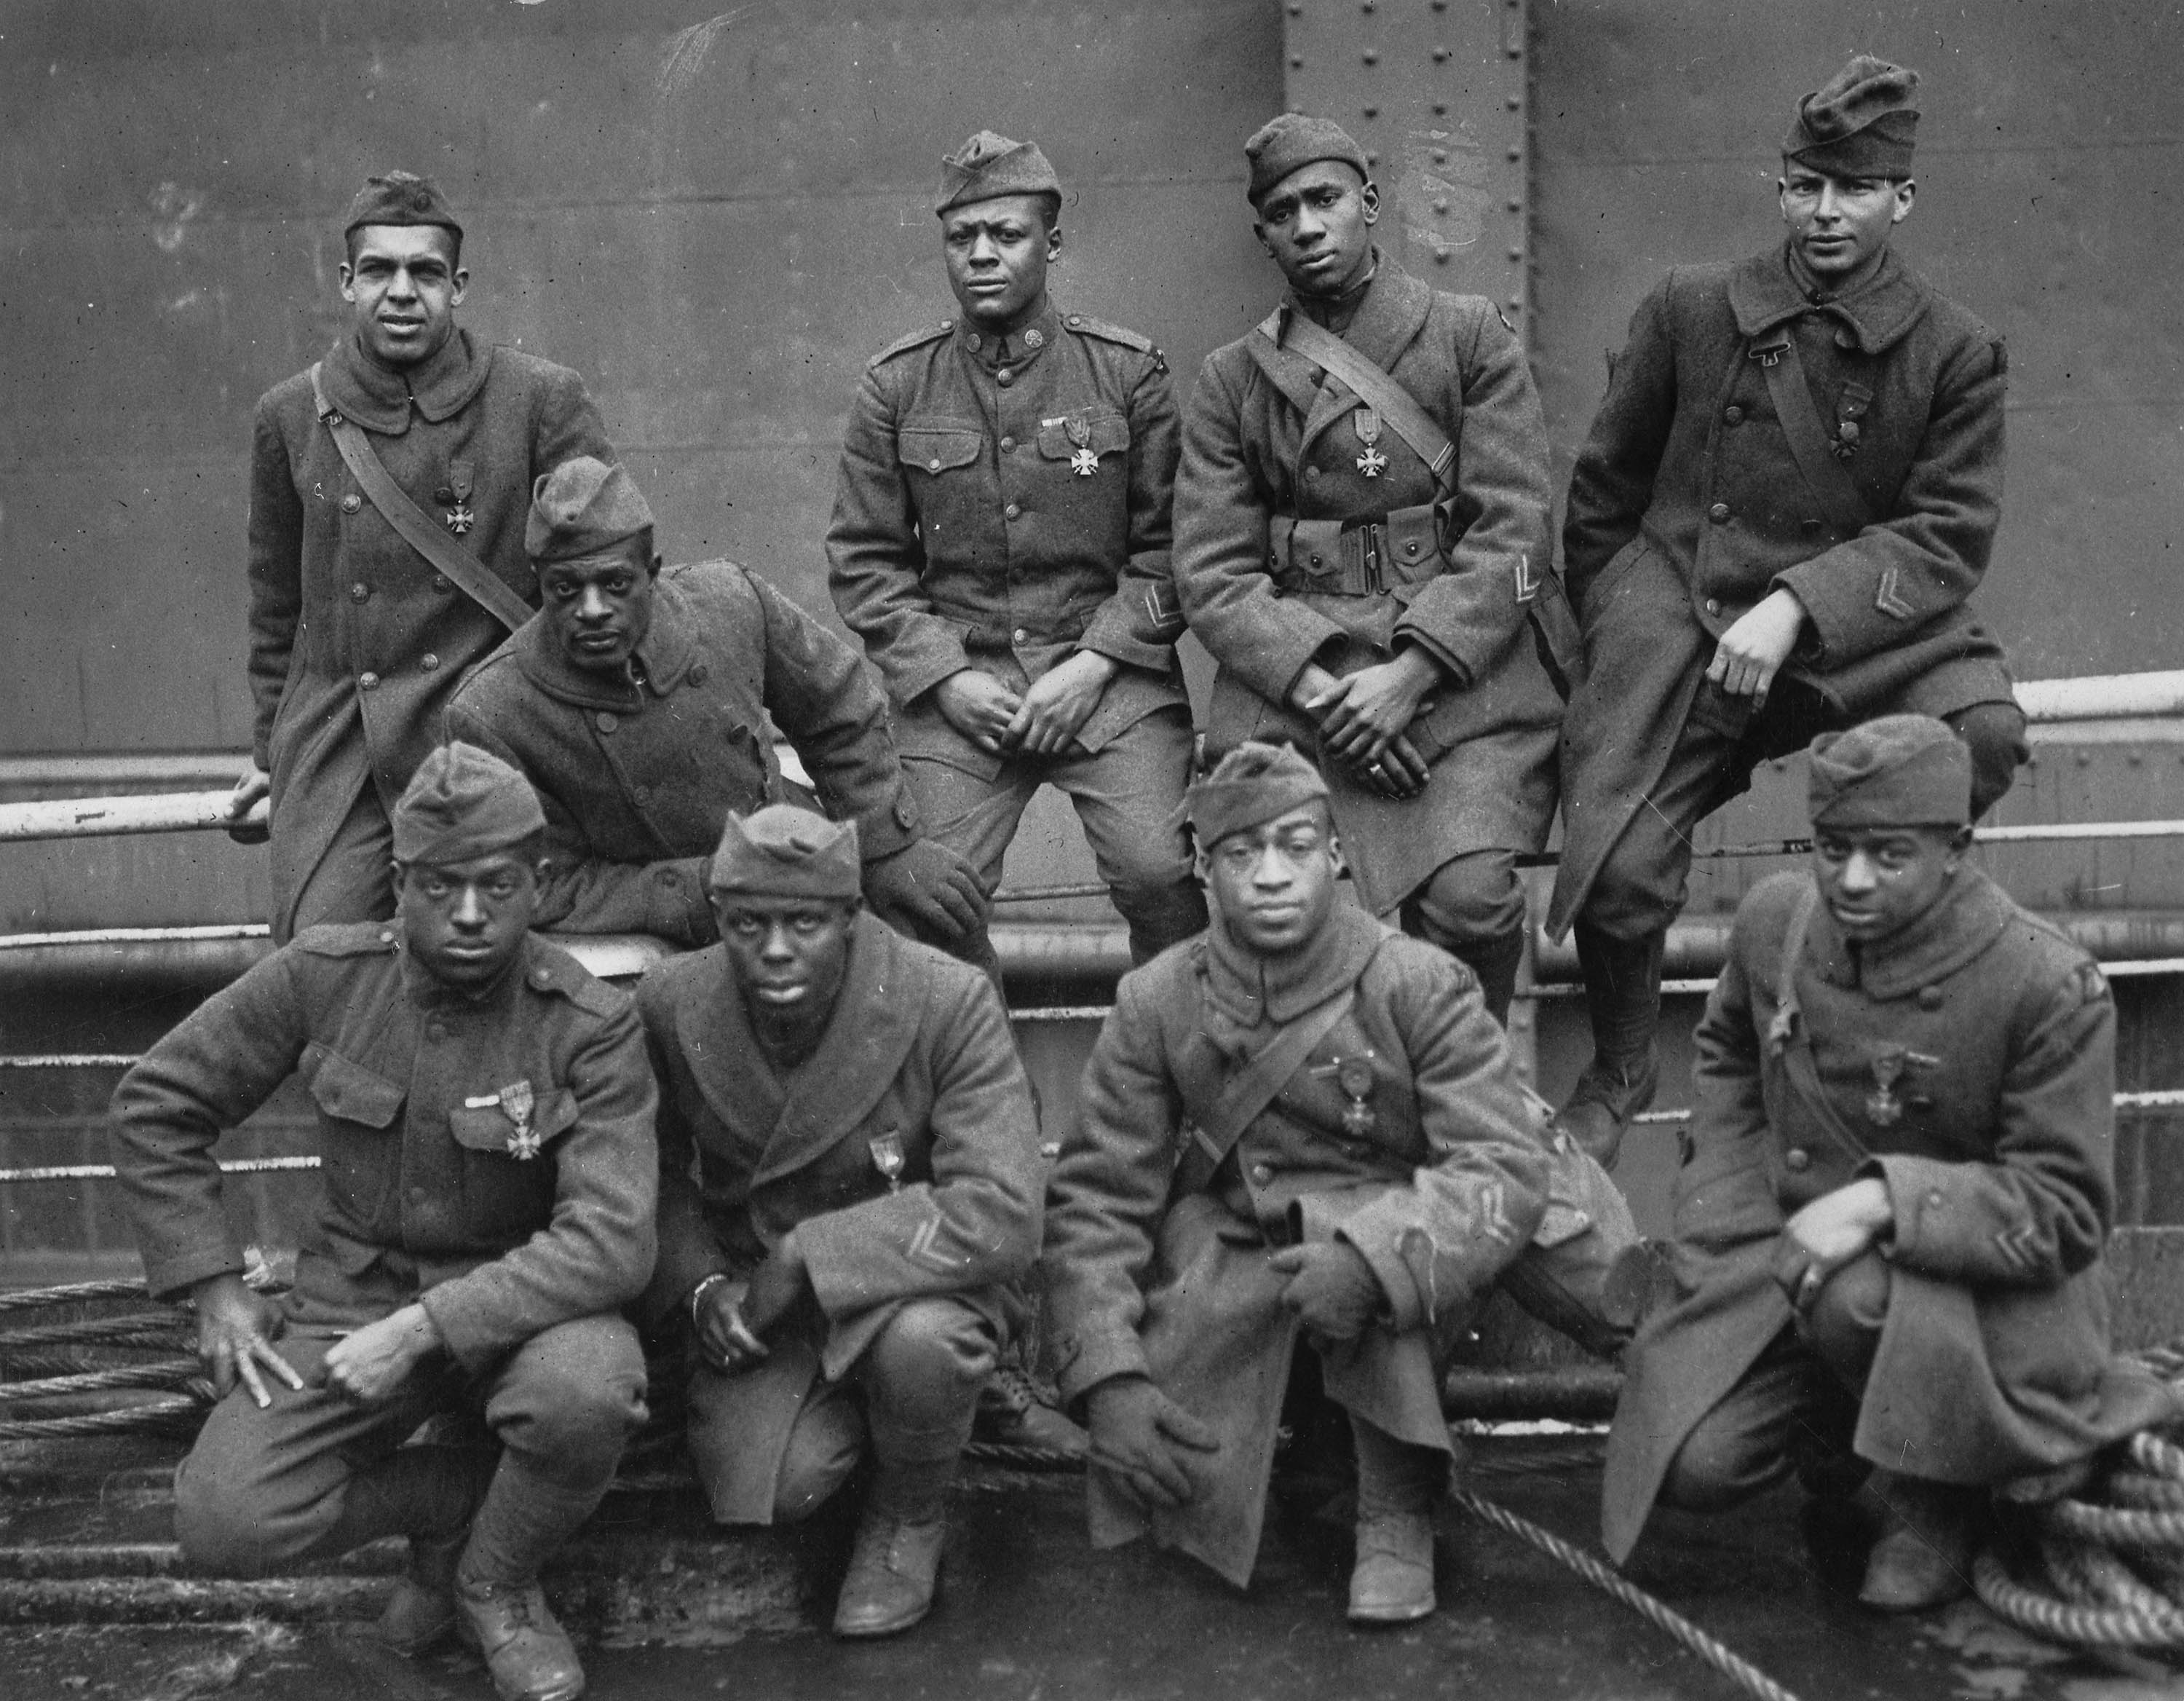 Harlem Hellfighters  Soldiers of the 369th Infantry Regiment, 15th N.Y. National Guard Regiment who won the Croix de Guerre for gallantry in action, WWI -1919